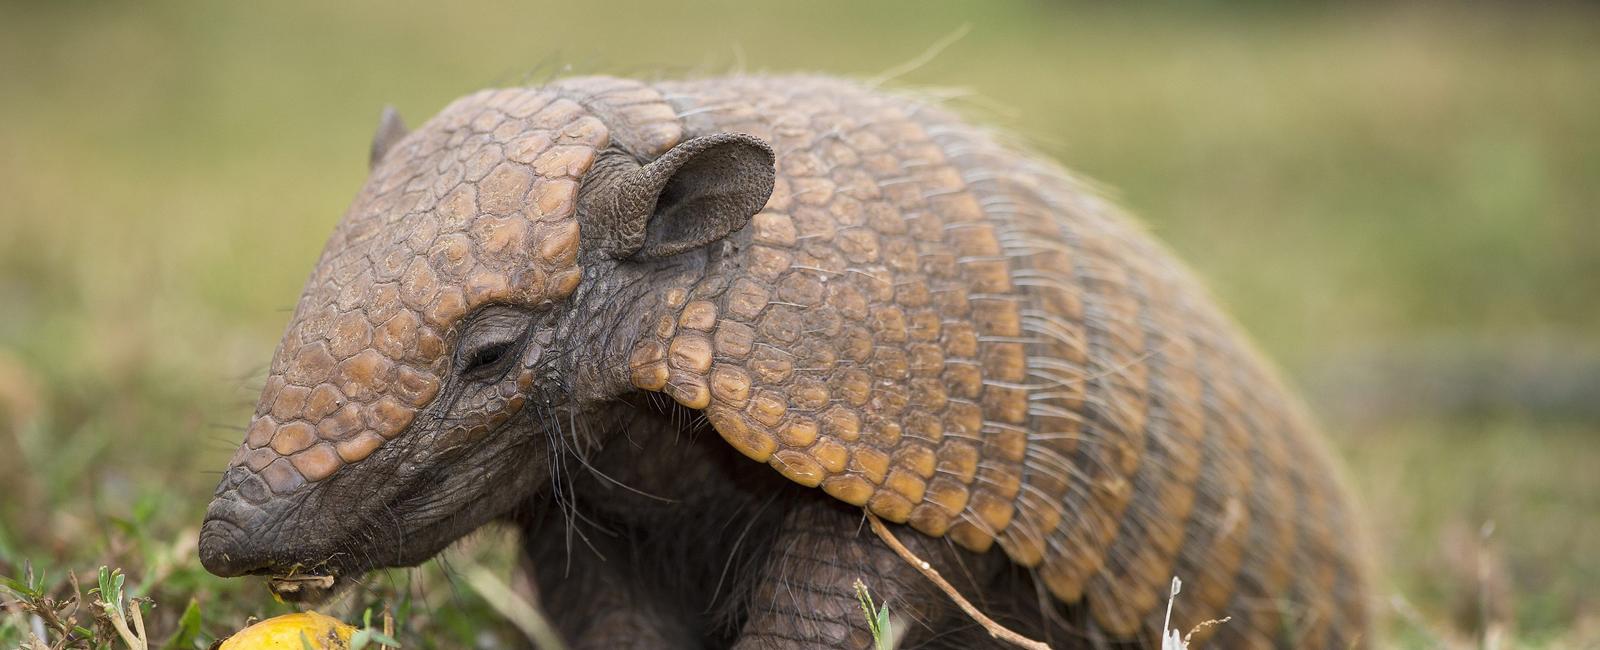 Armadillos are the only animal besides humans that can get leprosy